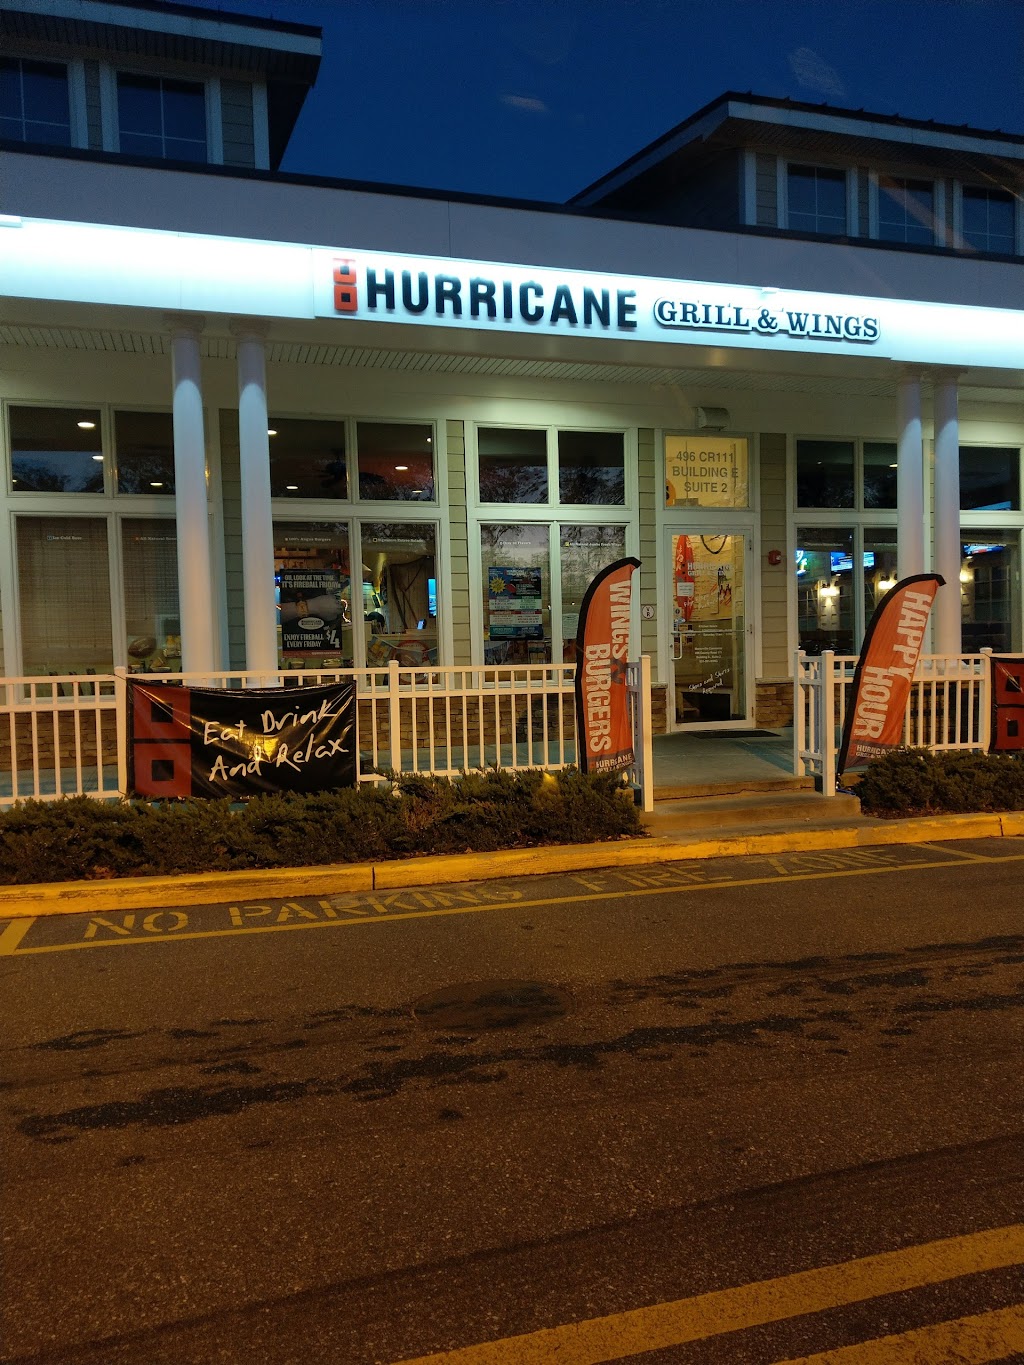 Hurricane Grill & Wings | 496 Eastport Manor Road, 2 County Rd 111 Ste, Manorville, NY 11949 | Phone: (631) 281-9464